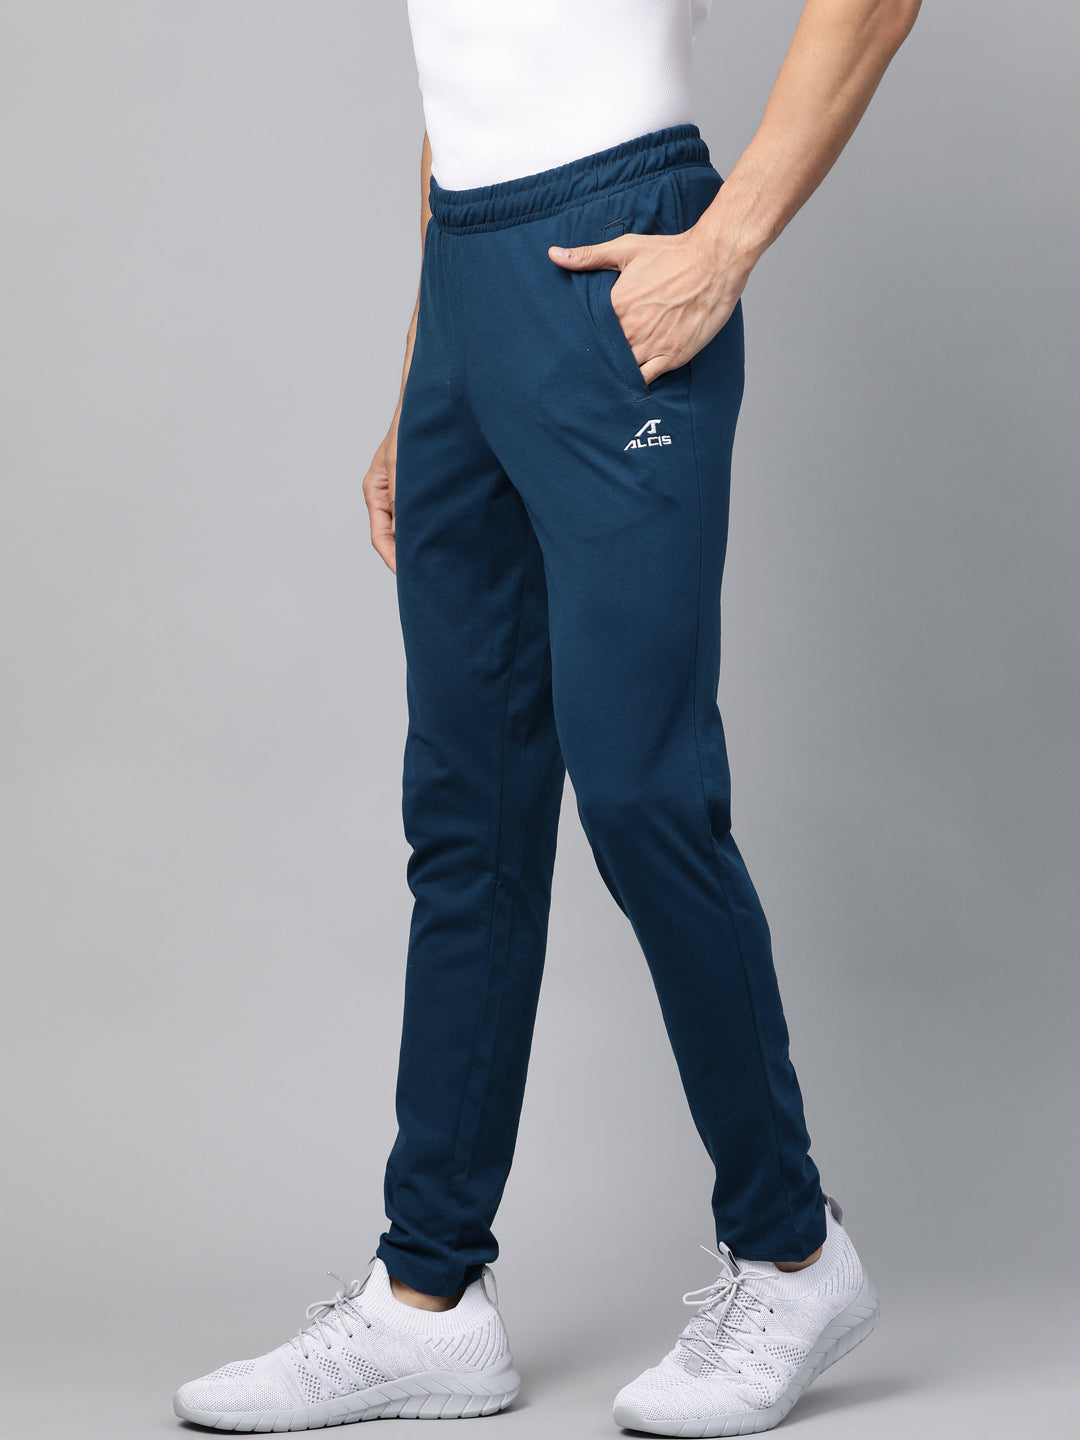 Alcis Men Teal Blue Solid Outdoor Track Pants